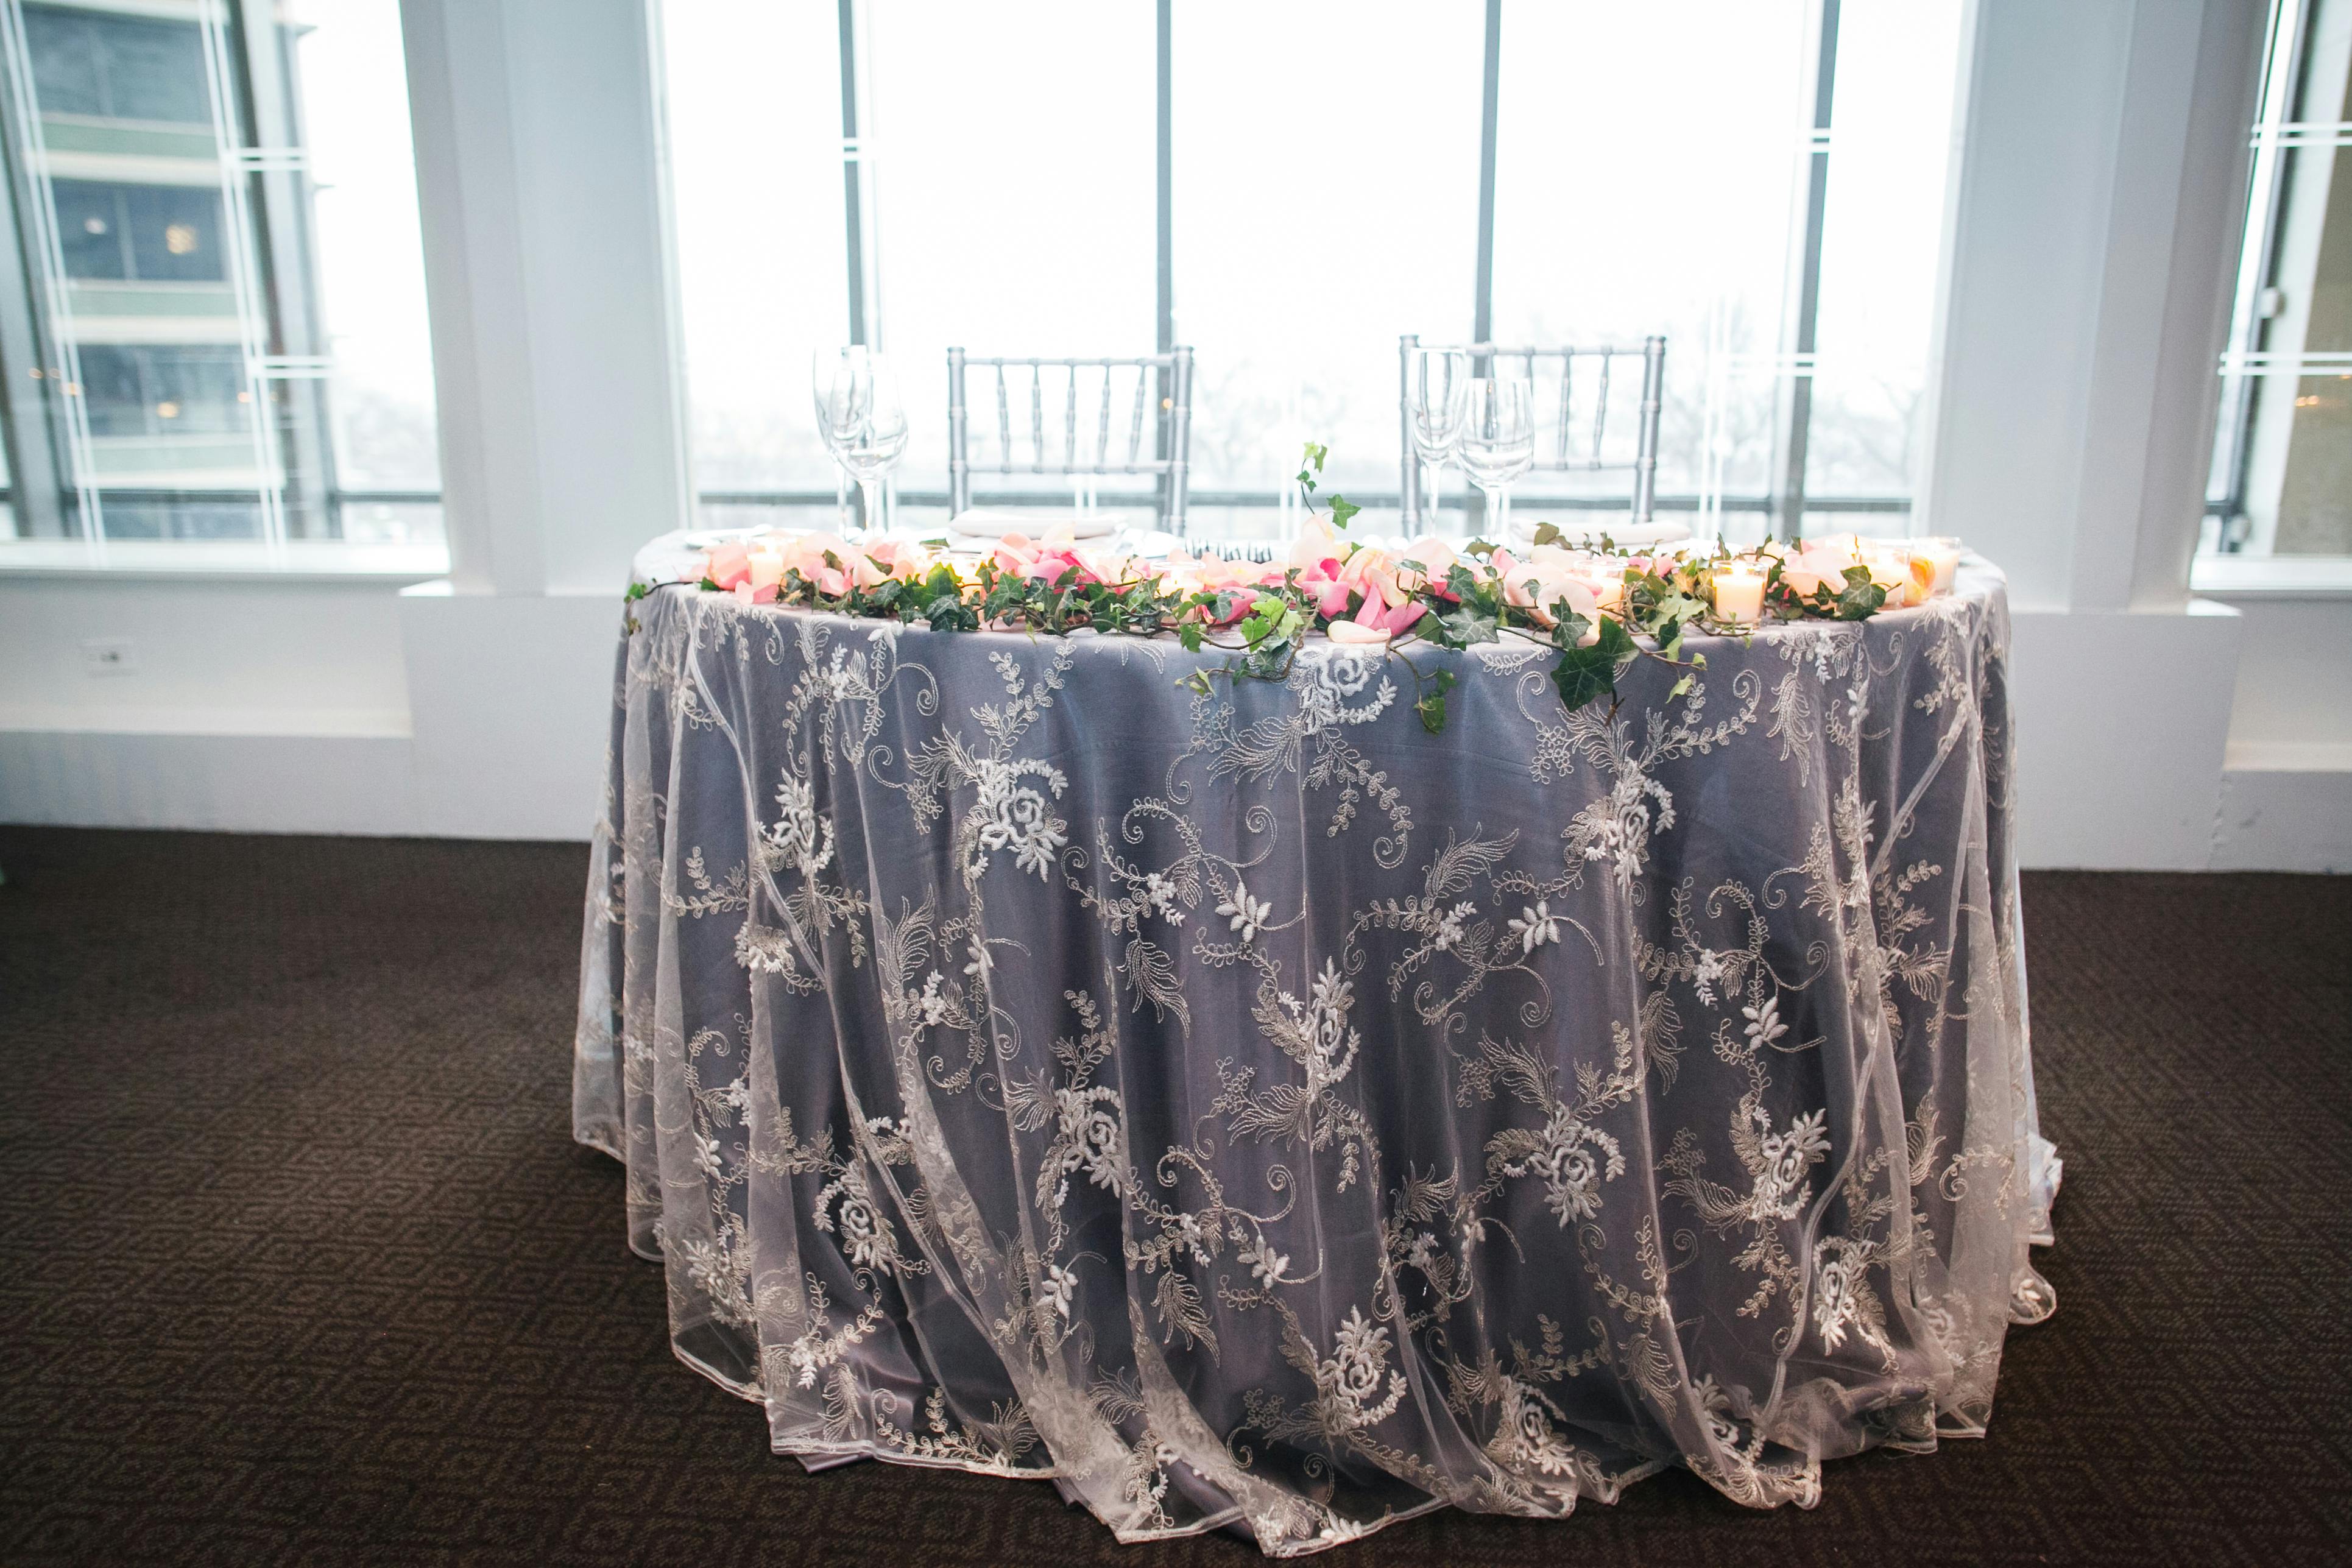 Glamorous Sweetheart Table in Silver Gray Spring Wedding Color Palette